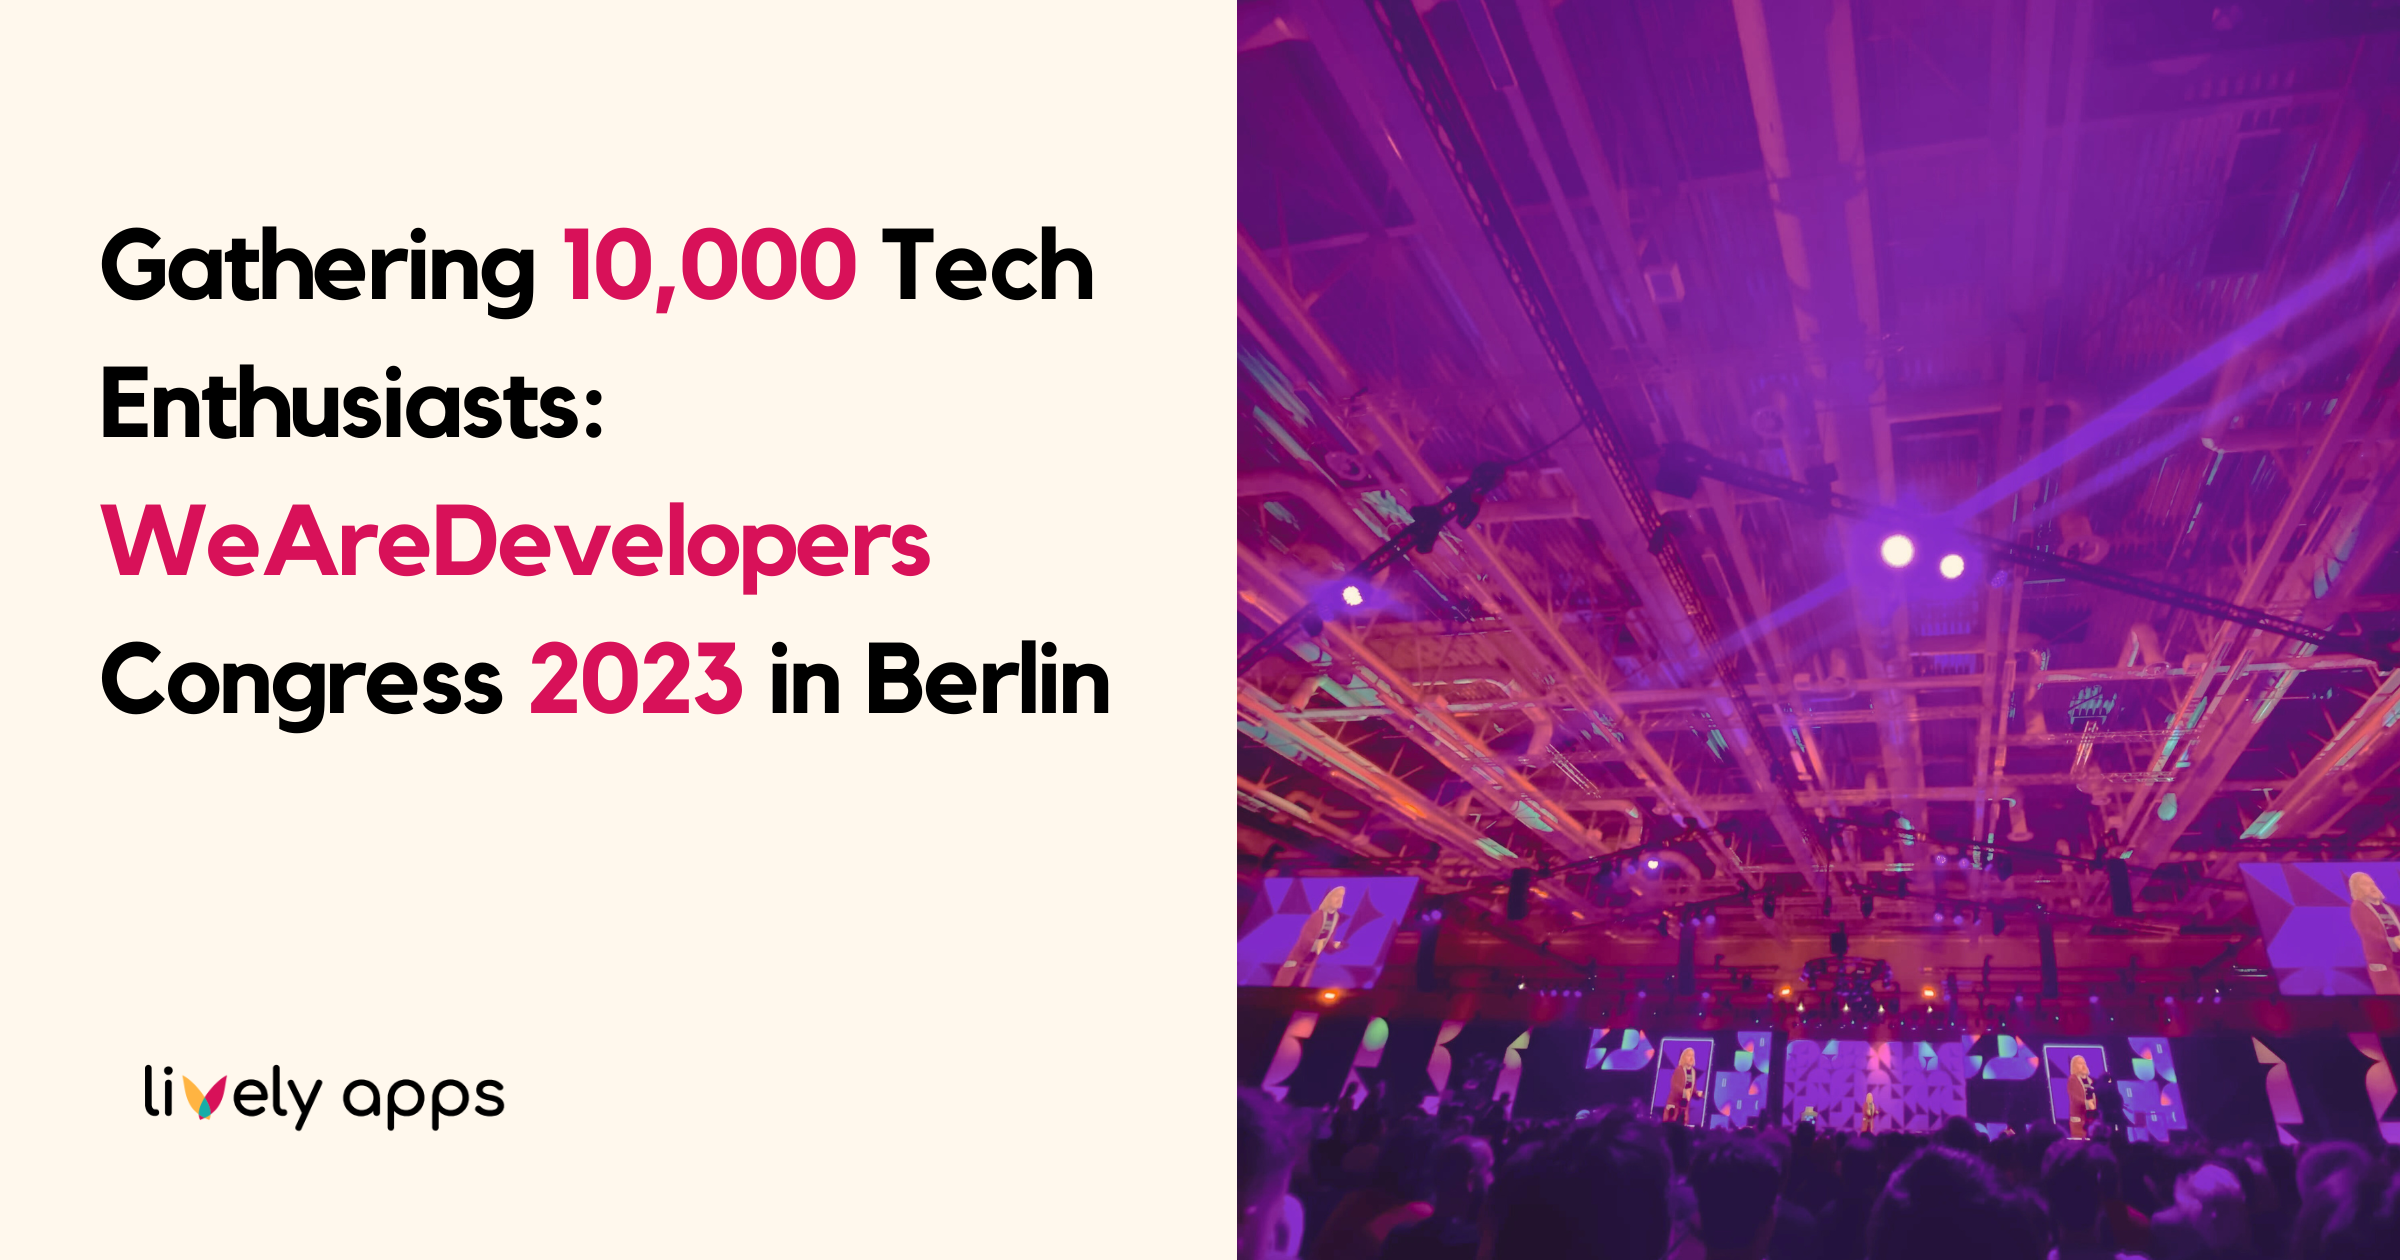 Gathering 10,000 Tech Enthusiasts: WeAreDevelopers Congress 2023 in Berlin